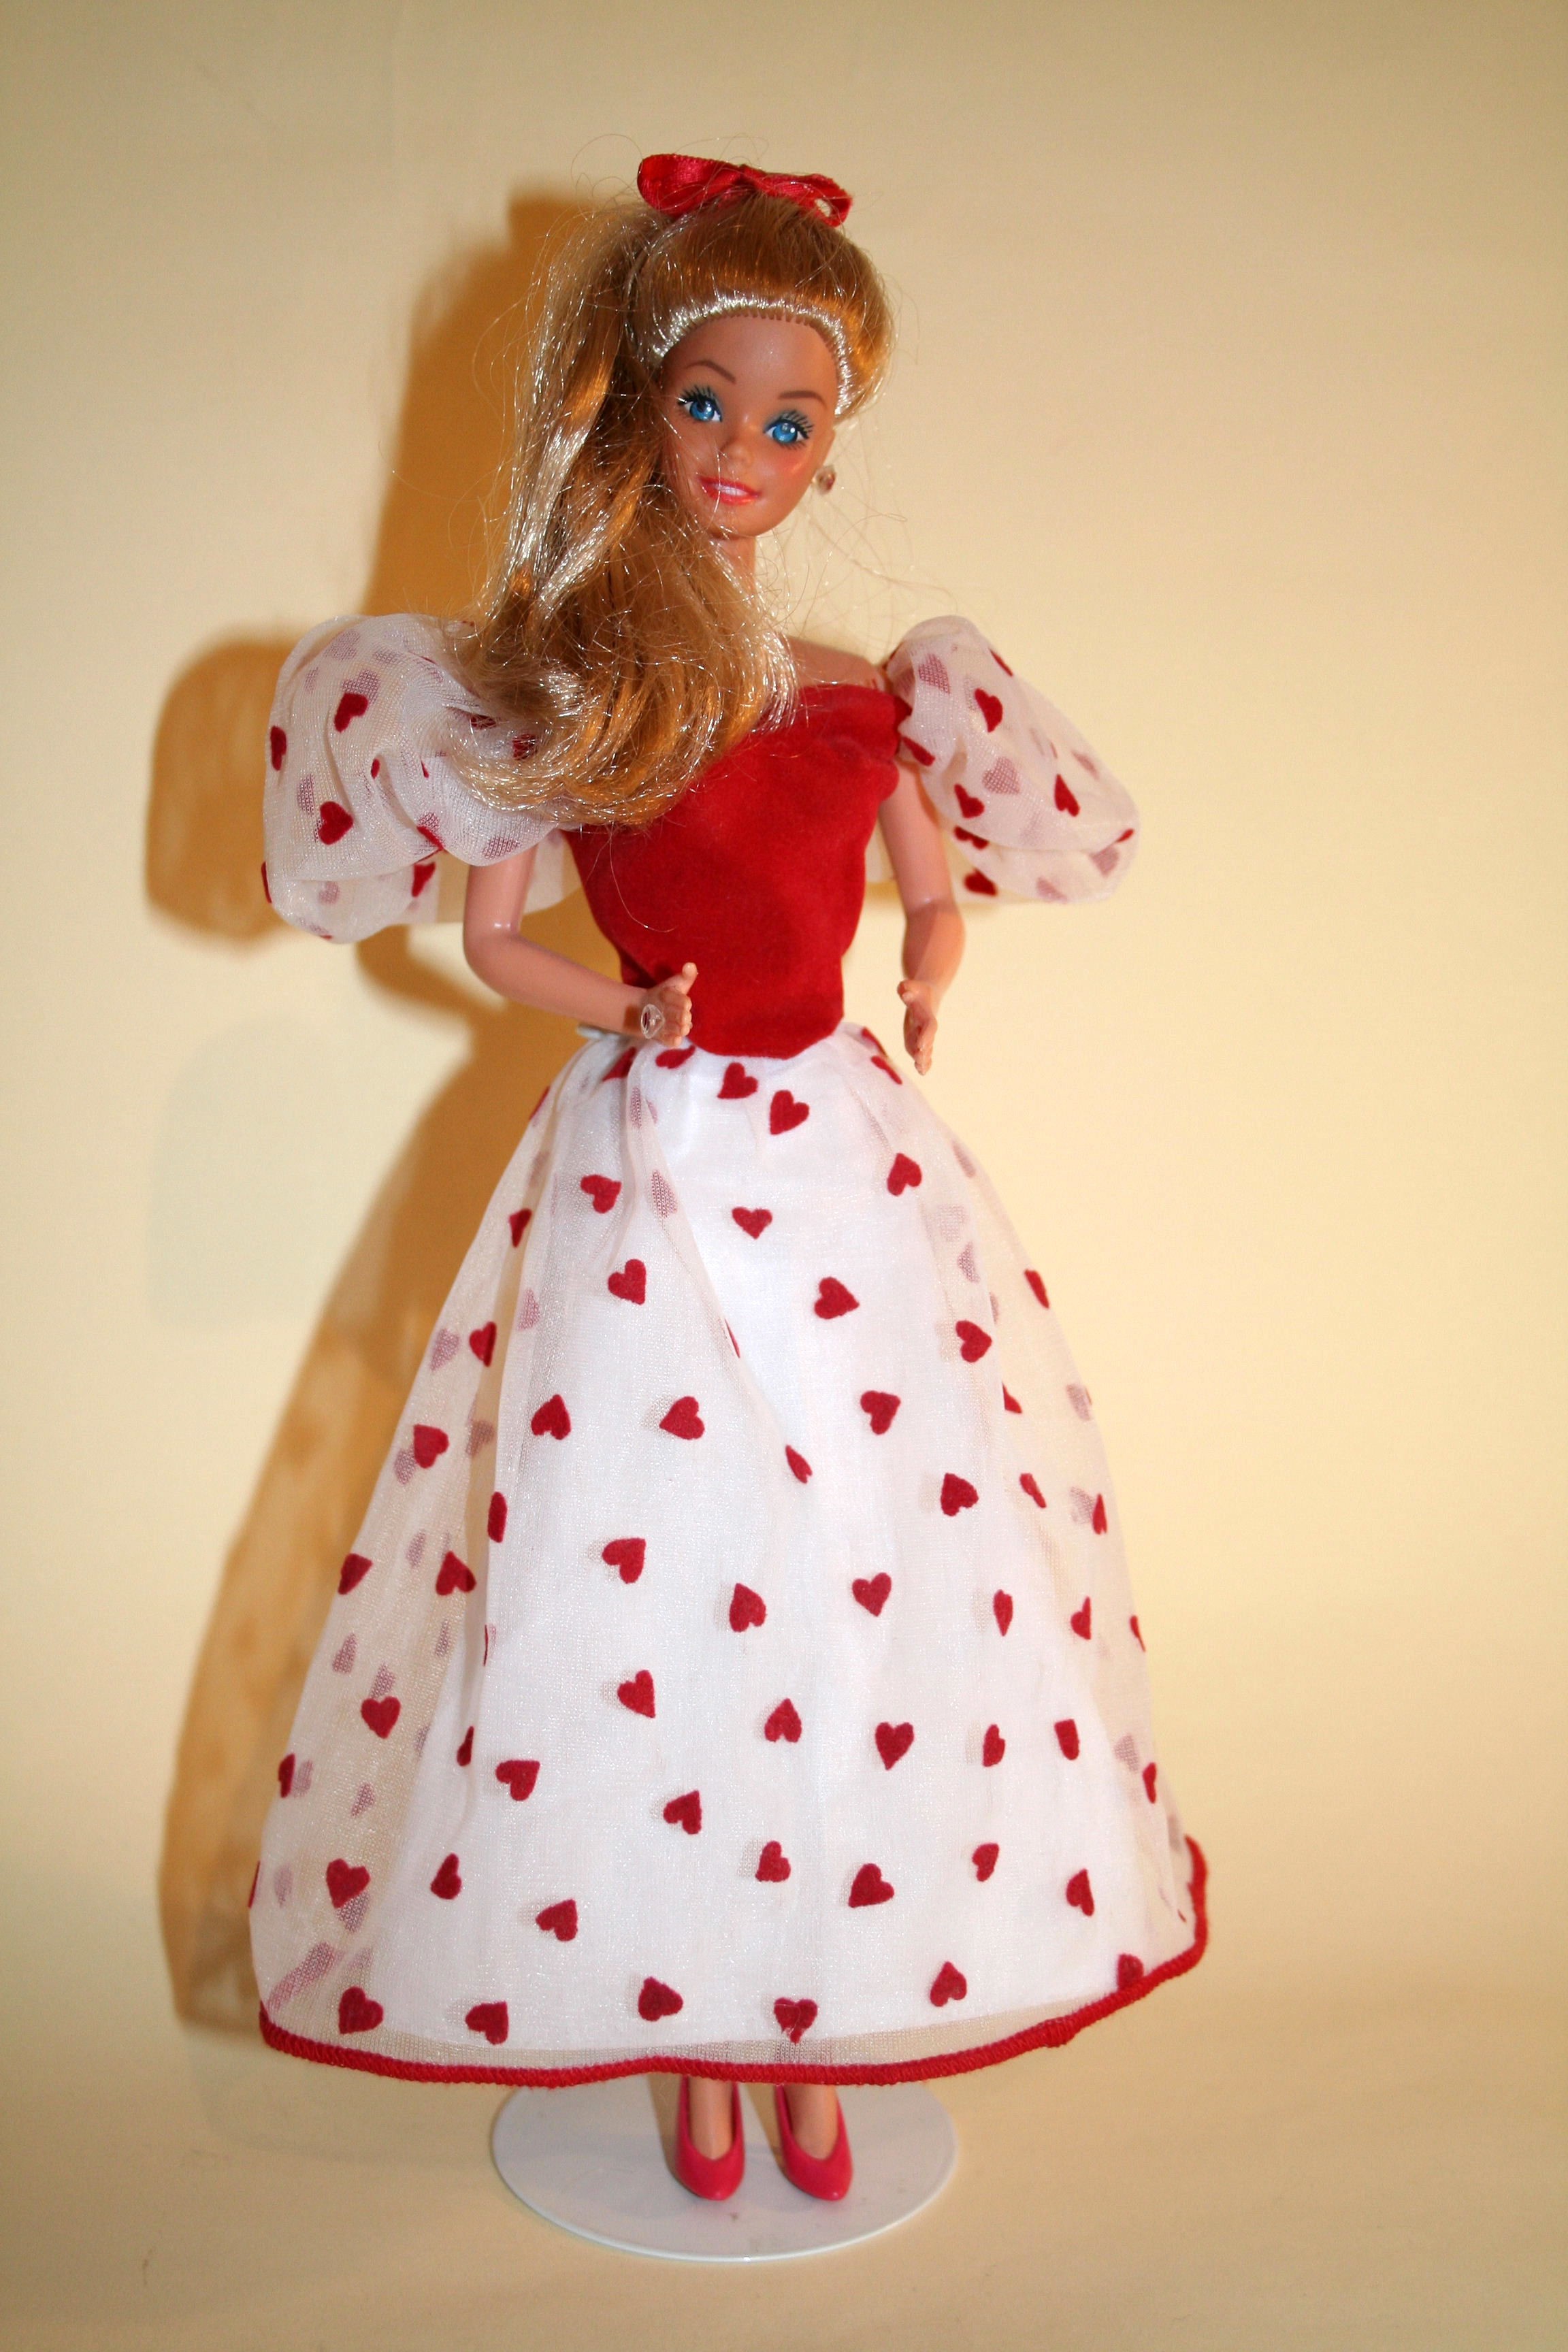 barbie with red heart dress